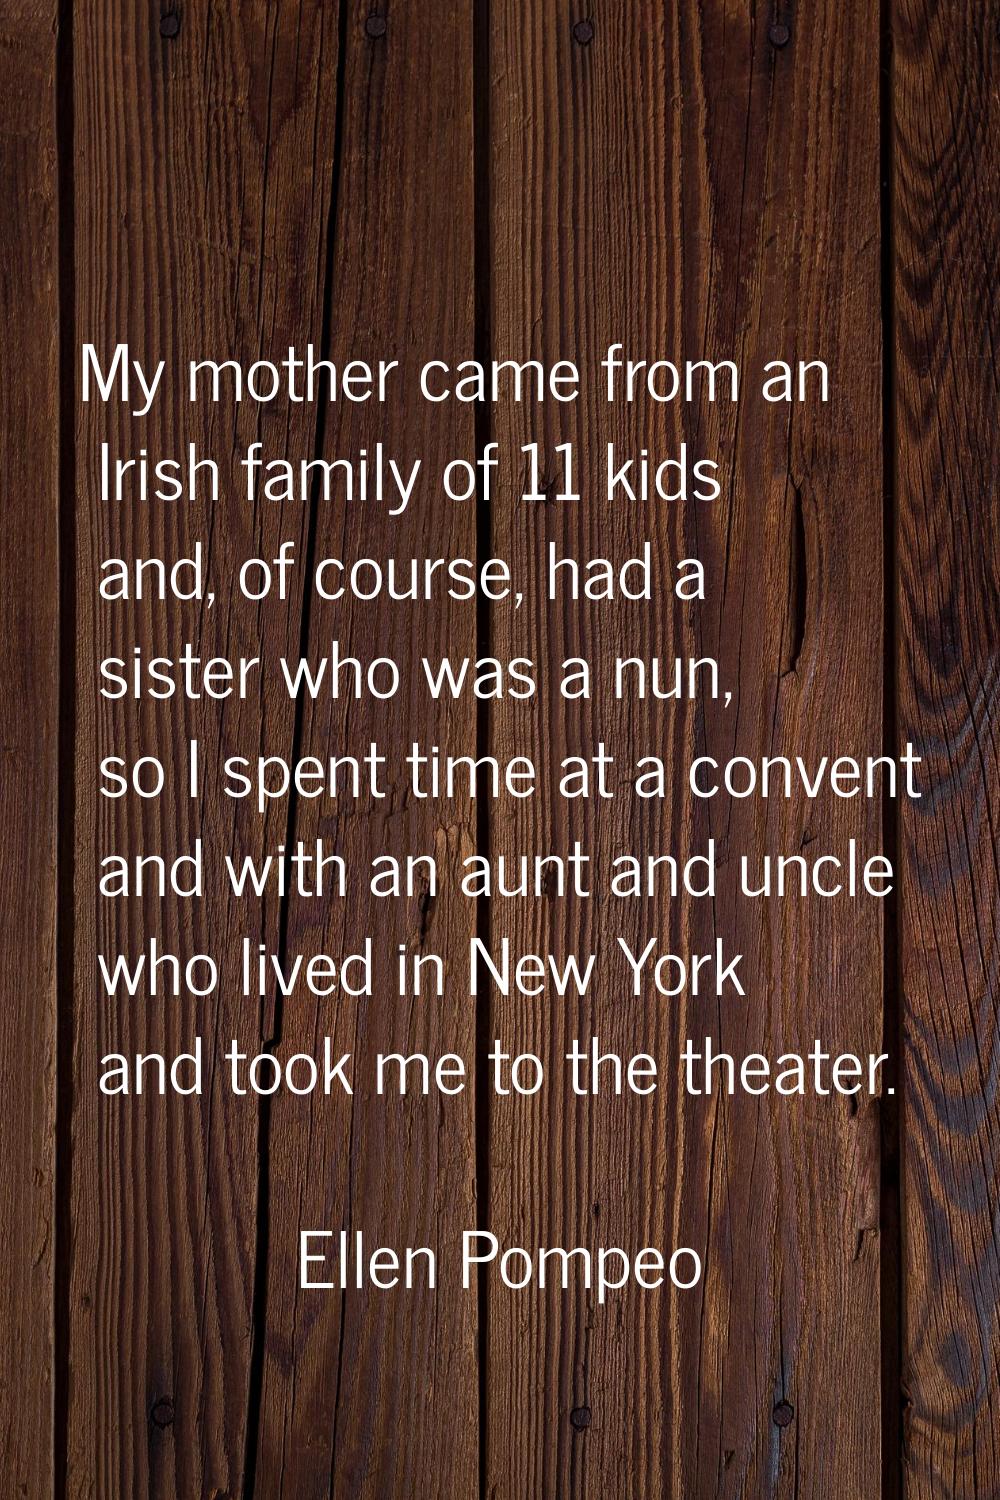 My mother came from an Irish family of 11 kids and, of course, had a sister who was a nun, so I spe